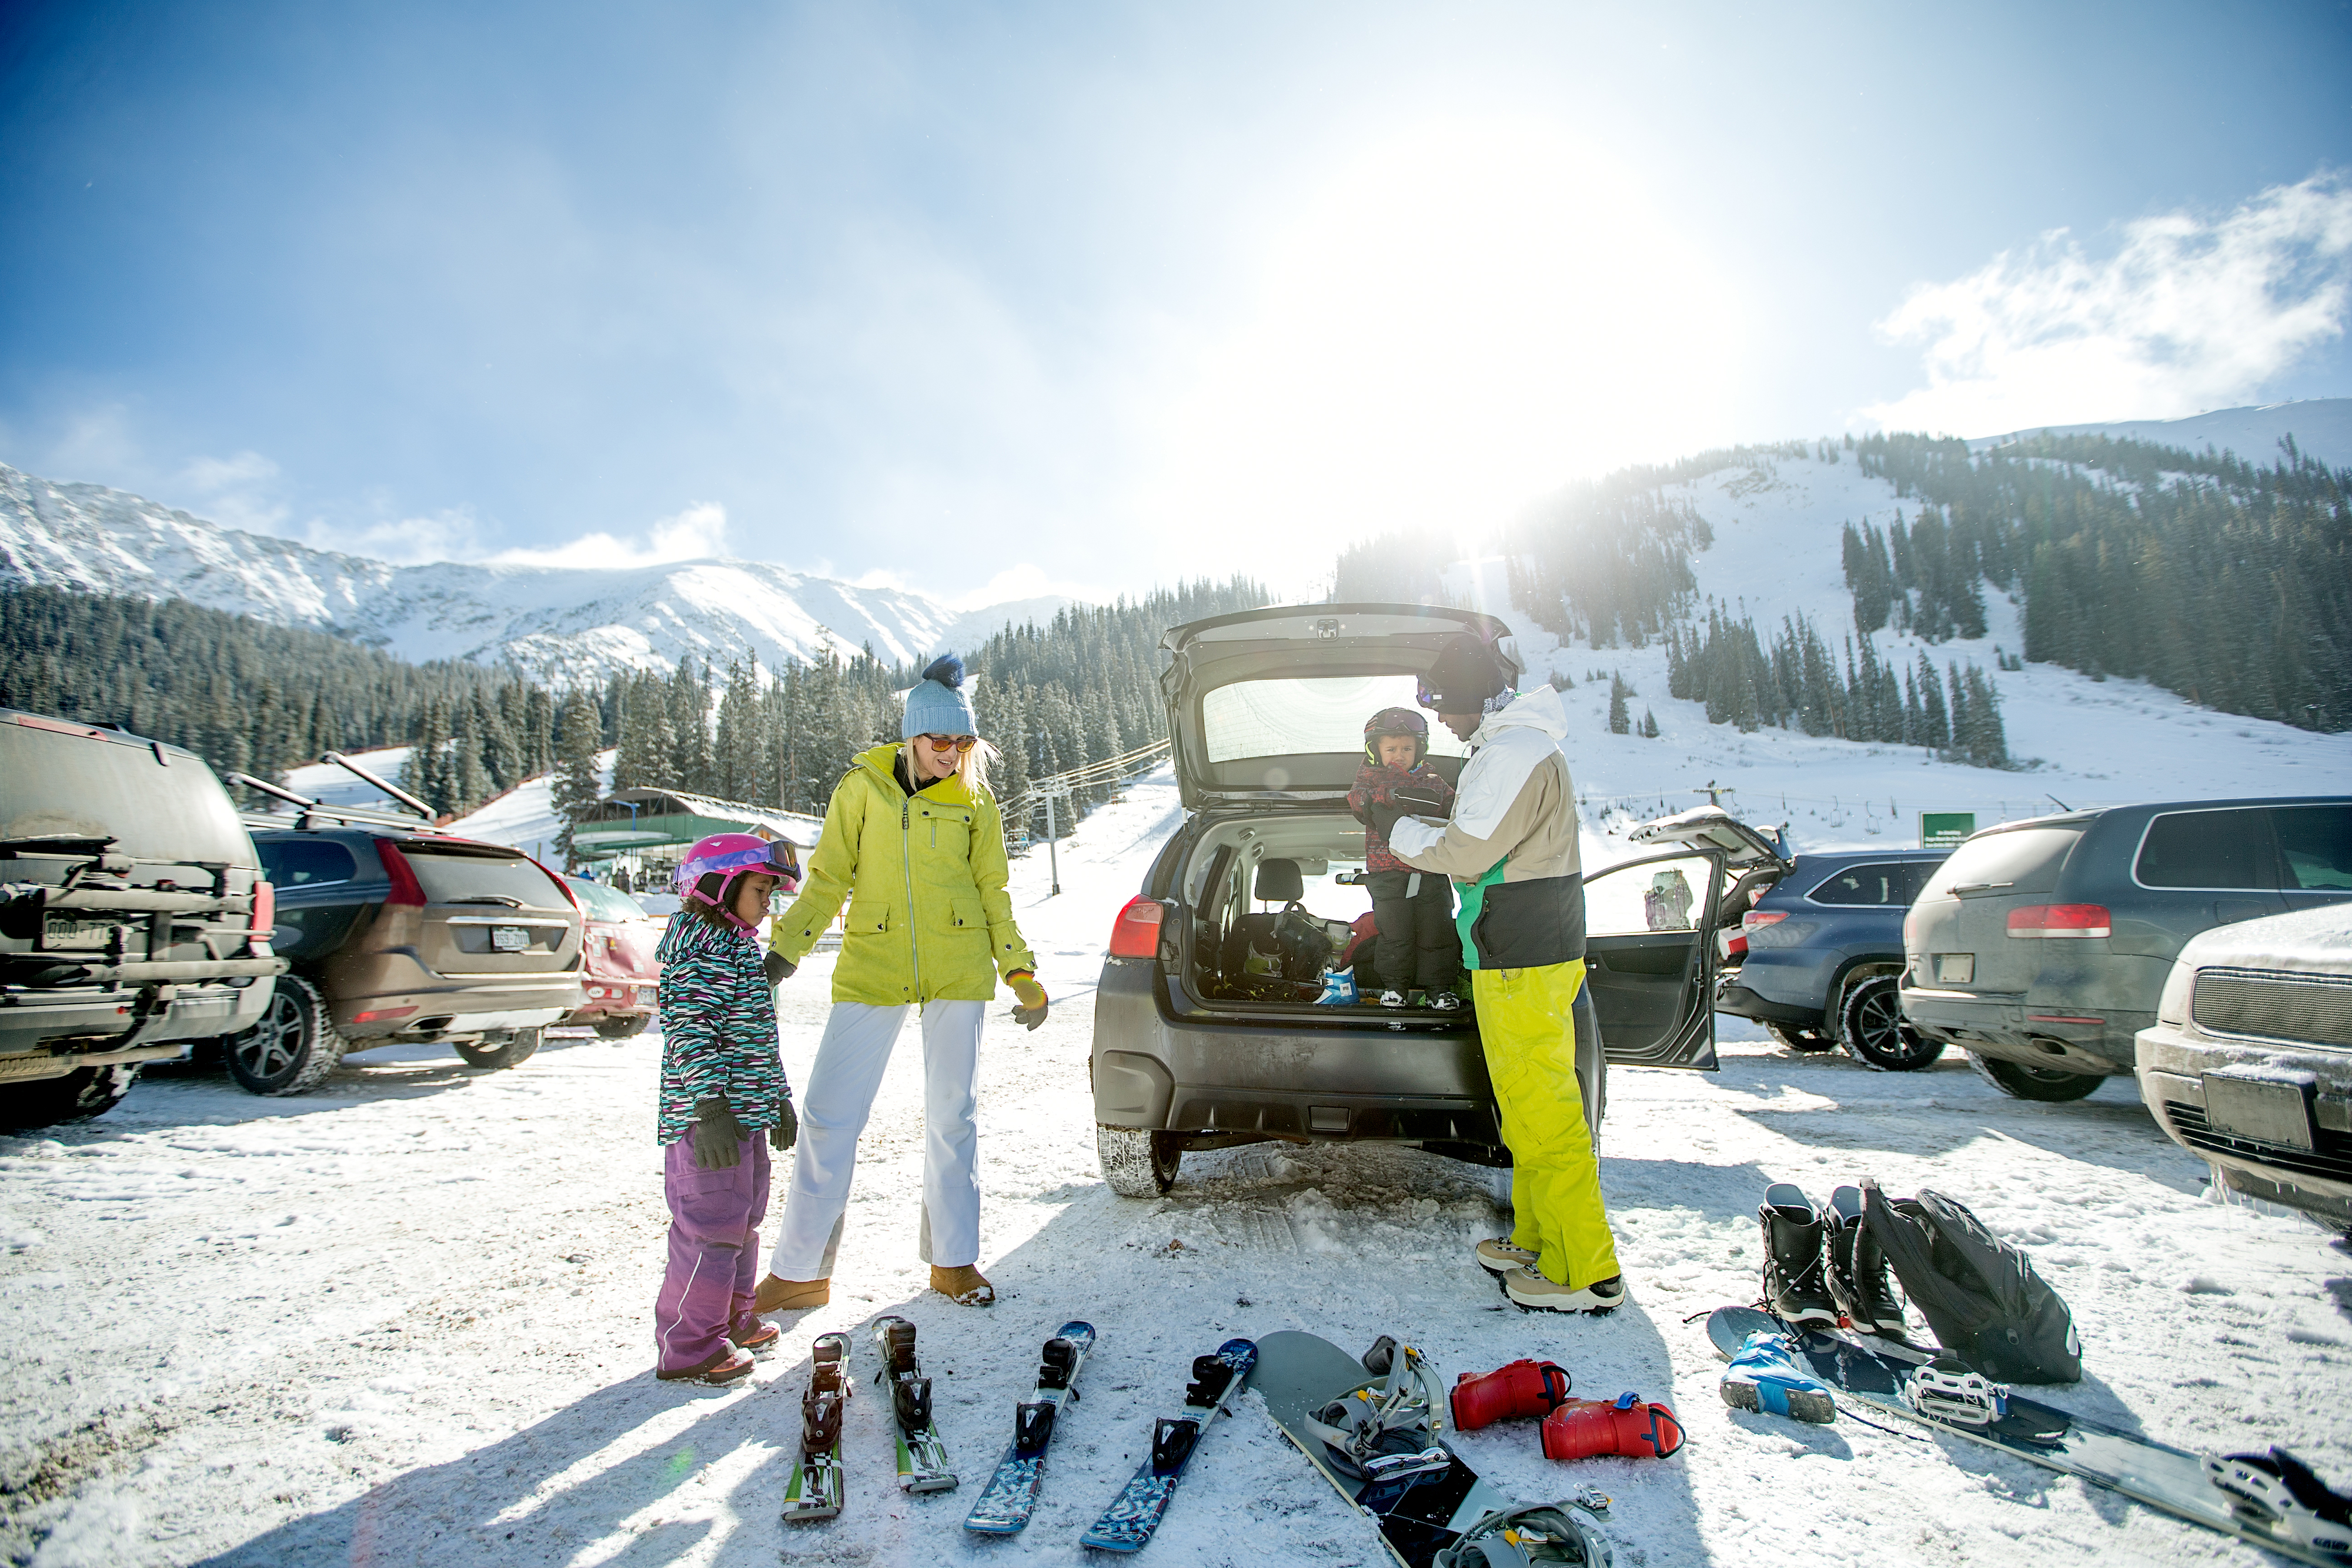 Three people in ski gear by a car in a snowy parking lot, preparing for skiing